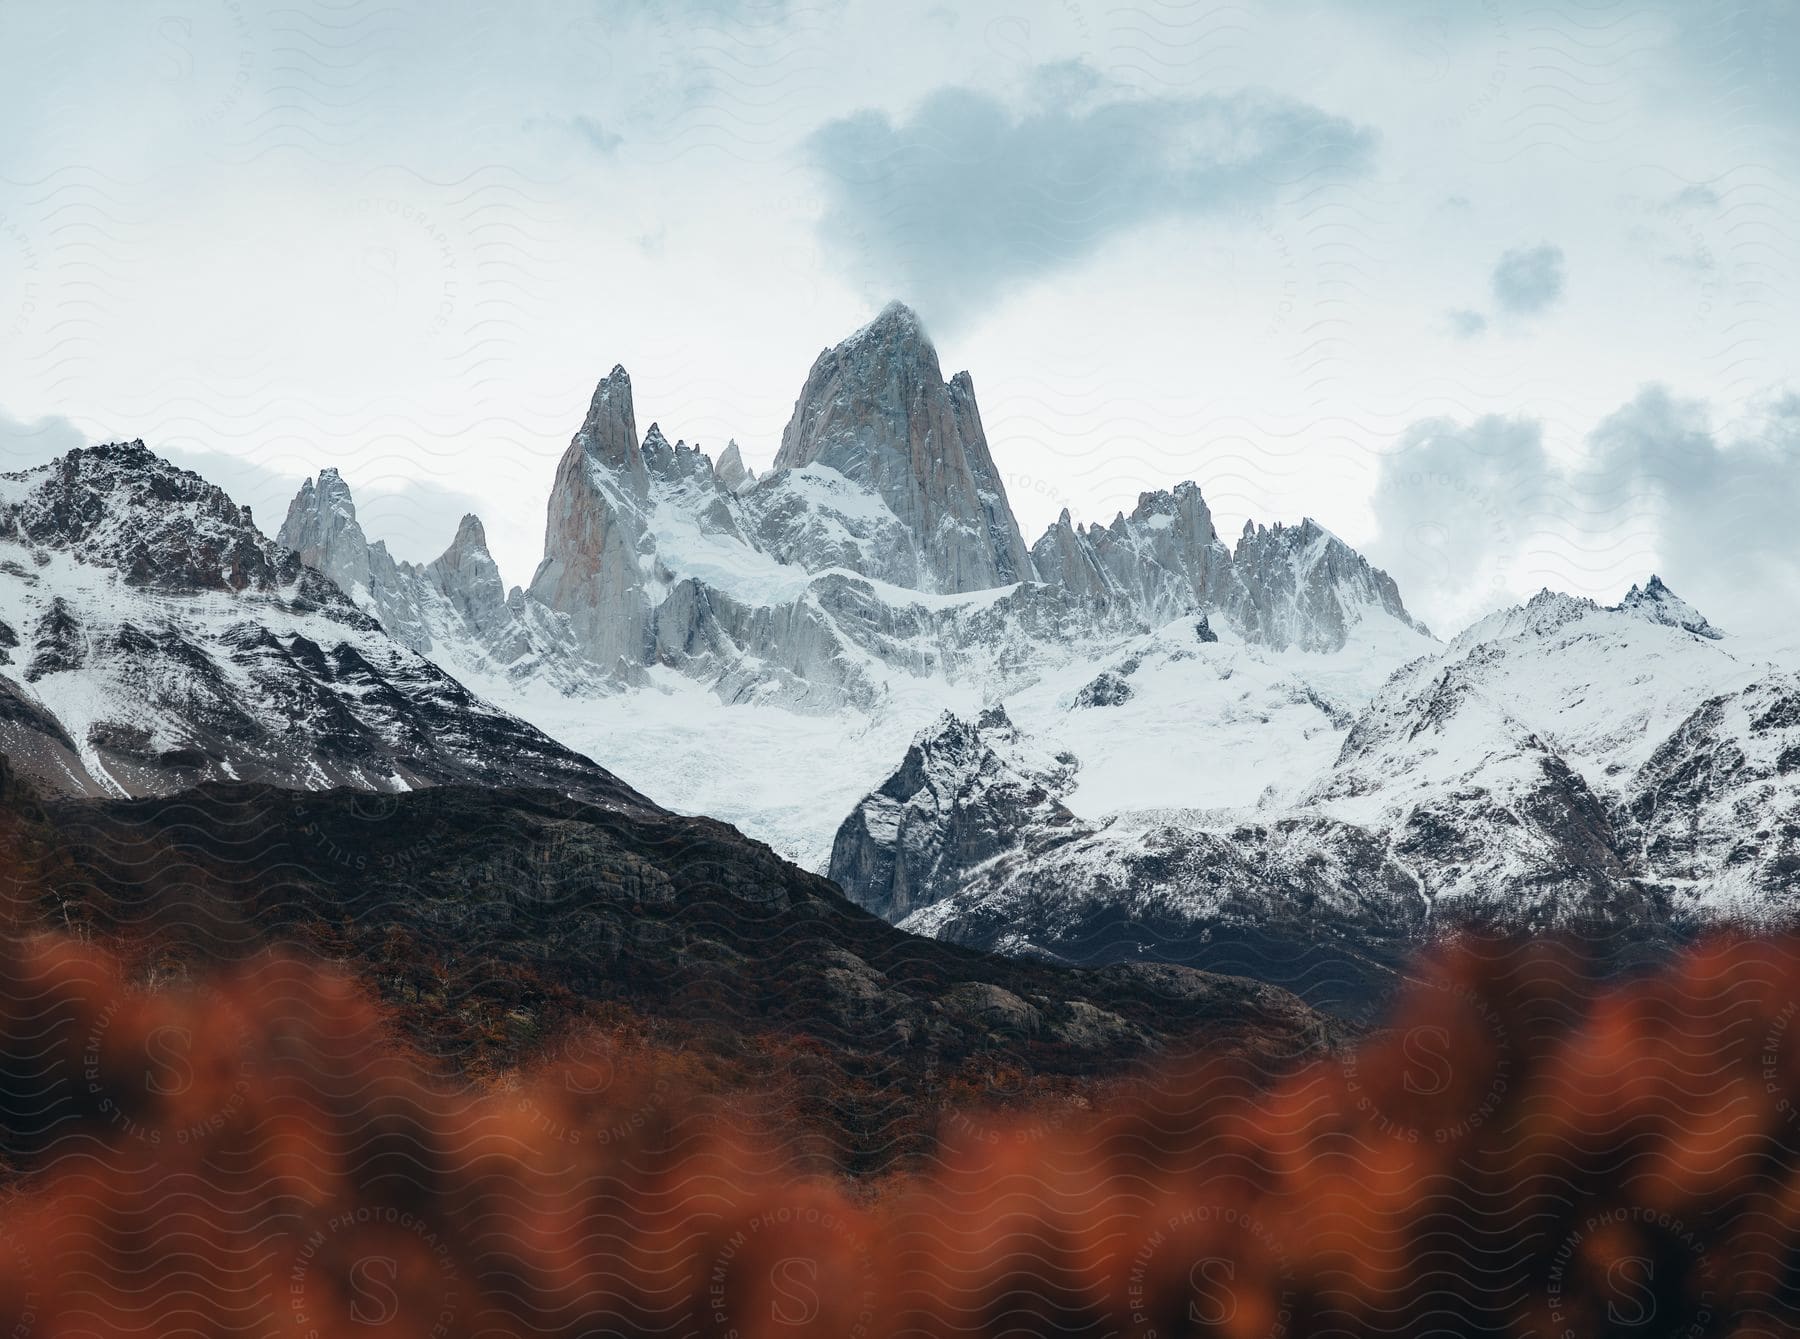 Snowcovered mountain ridge under a cloudy sky in patagonia